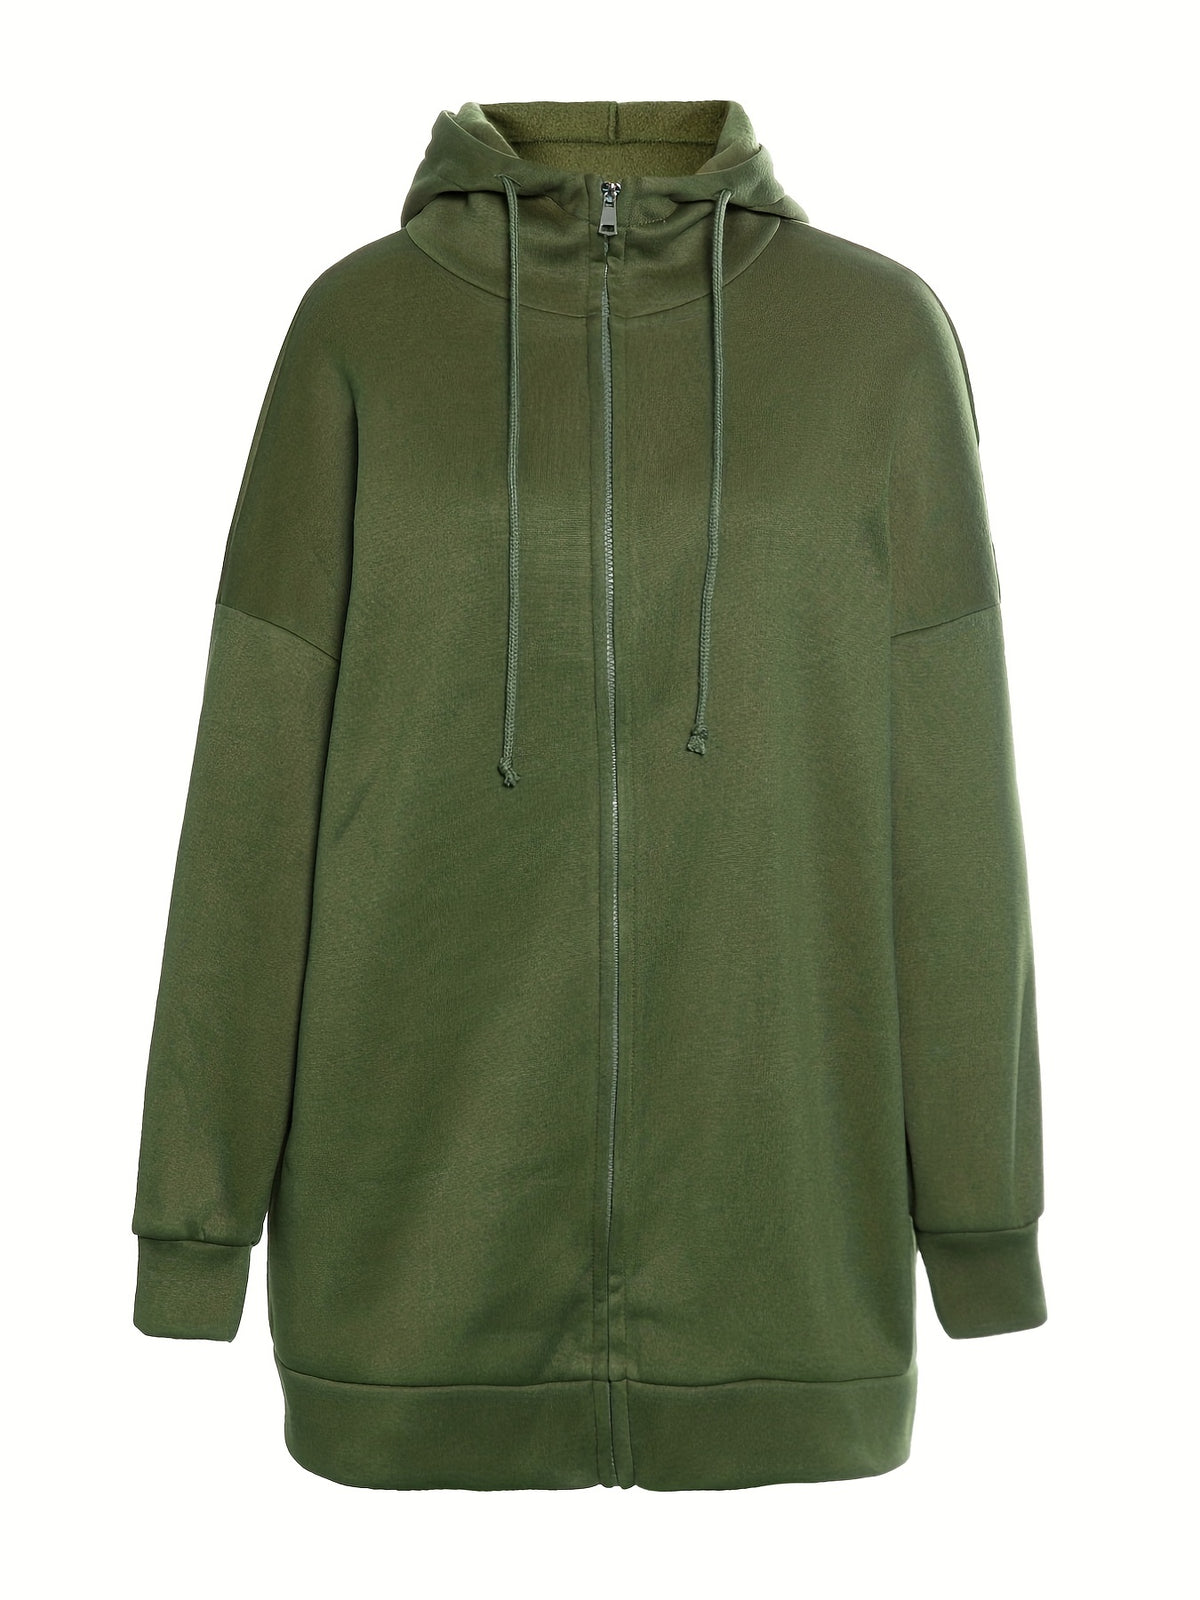 Solid Color Casual Sports Hooded Zipper Sweatshirs